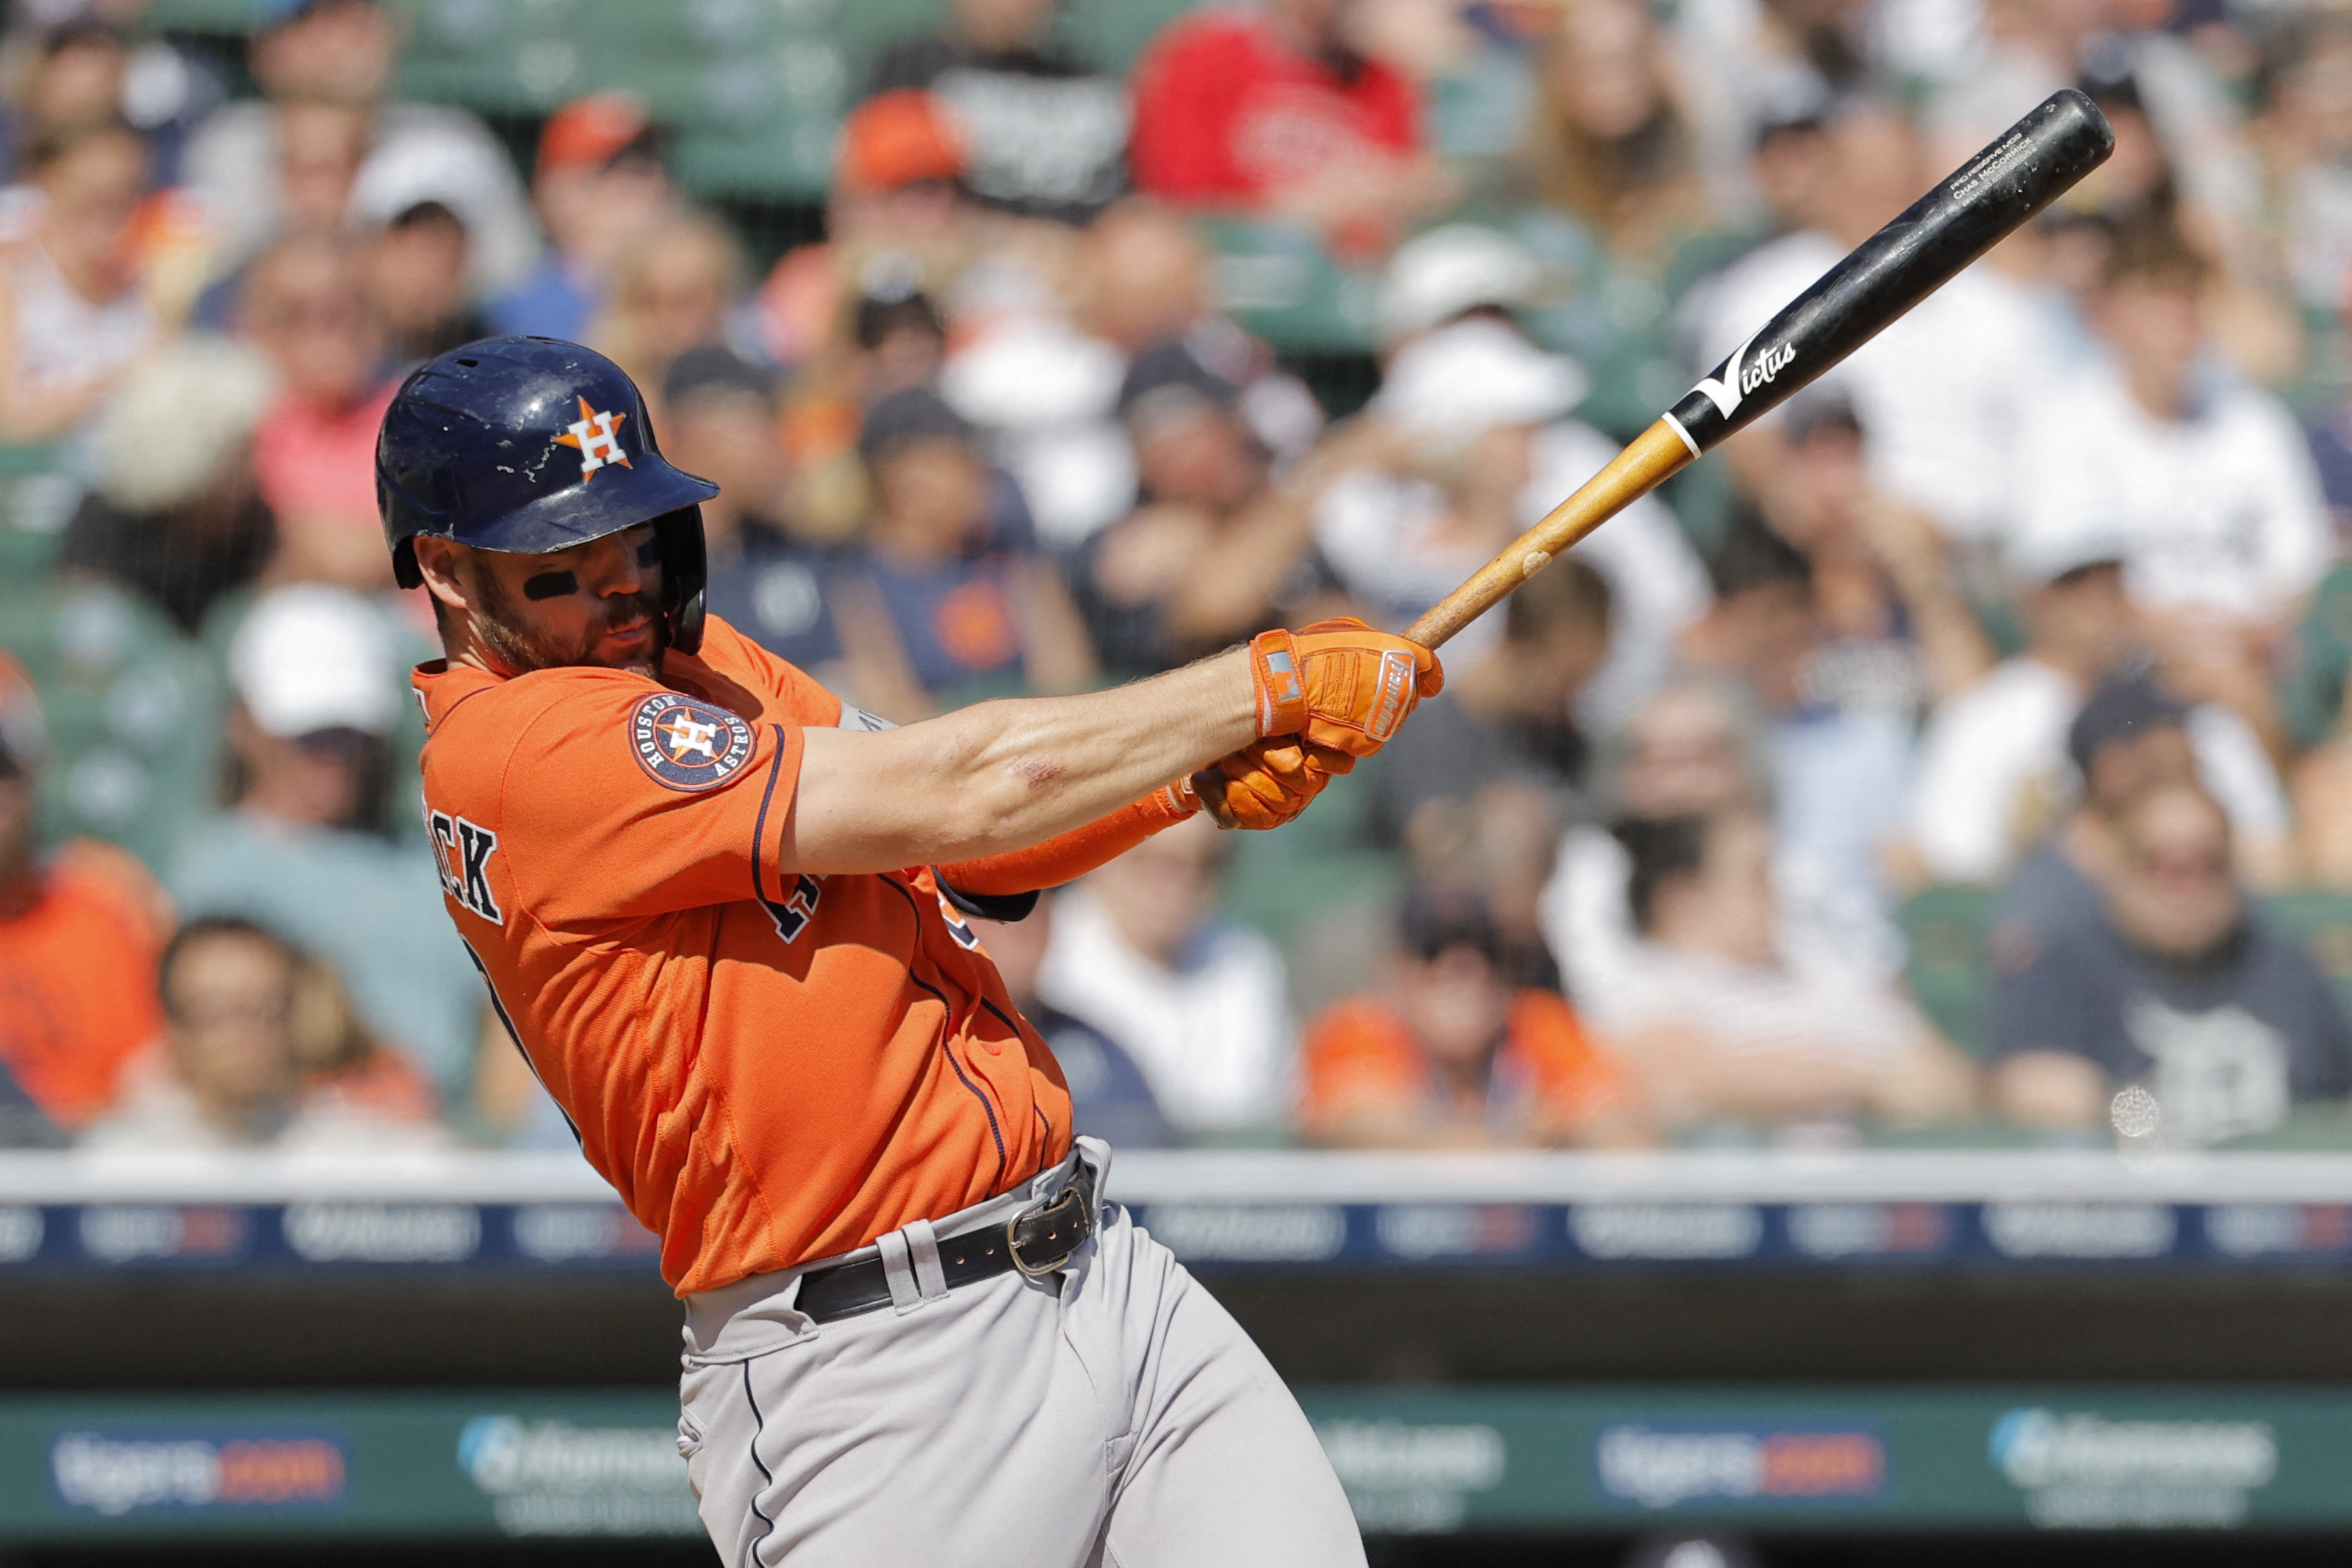 Houston Astros' Jeremy Peña collects 5 hits vs. Detroit Tigers